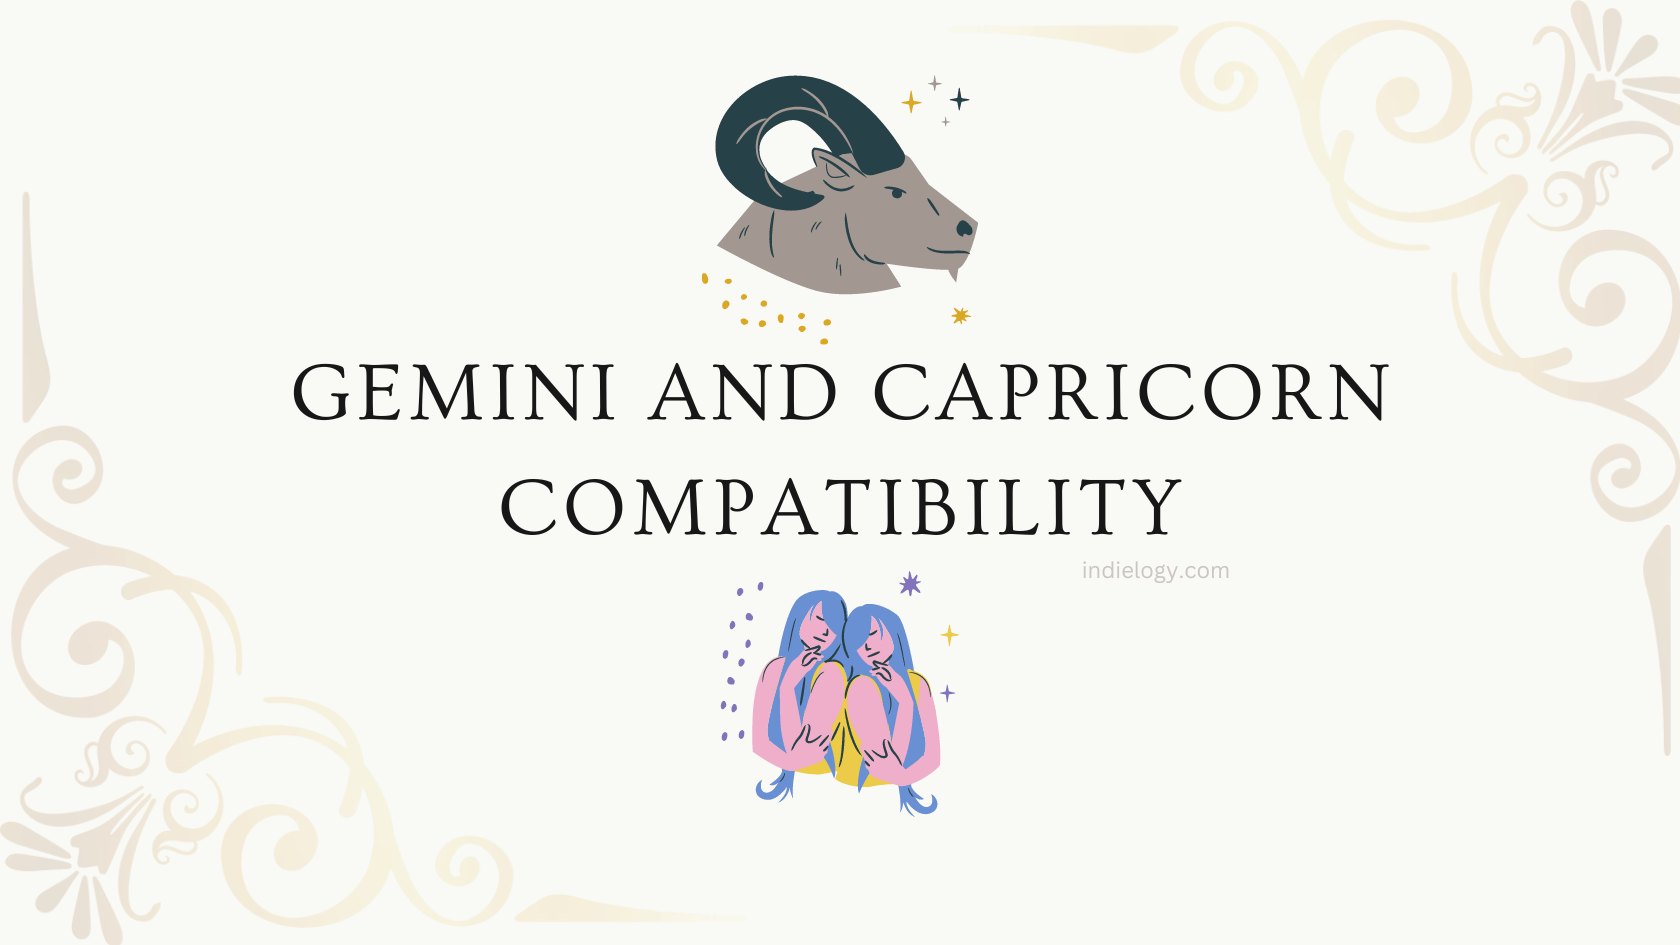 Gemini and Capricorn compatibility in love, relationships, and marriage ...